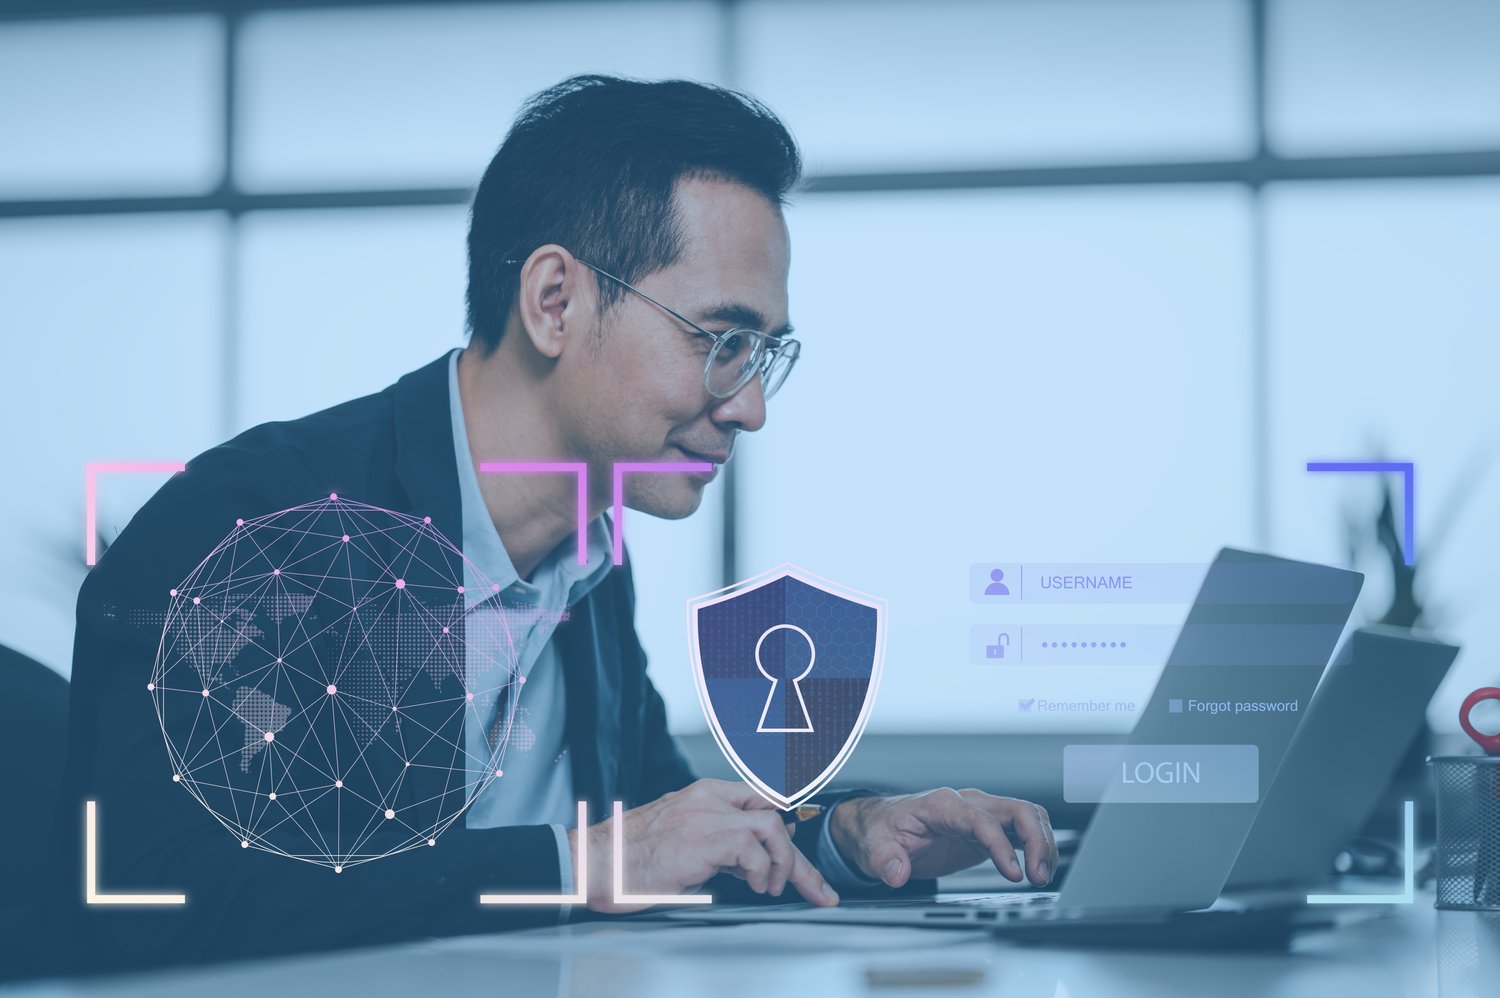 How long does it take to become a Cybersecurity Expert - XEye Academy